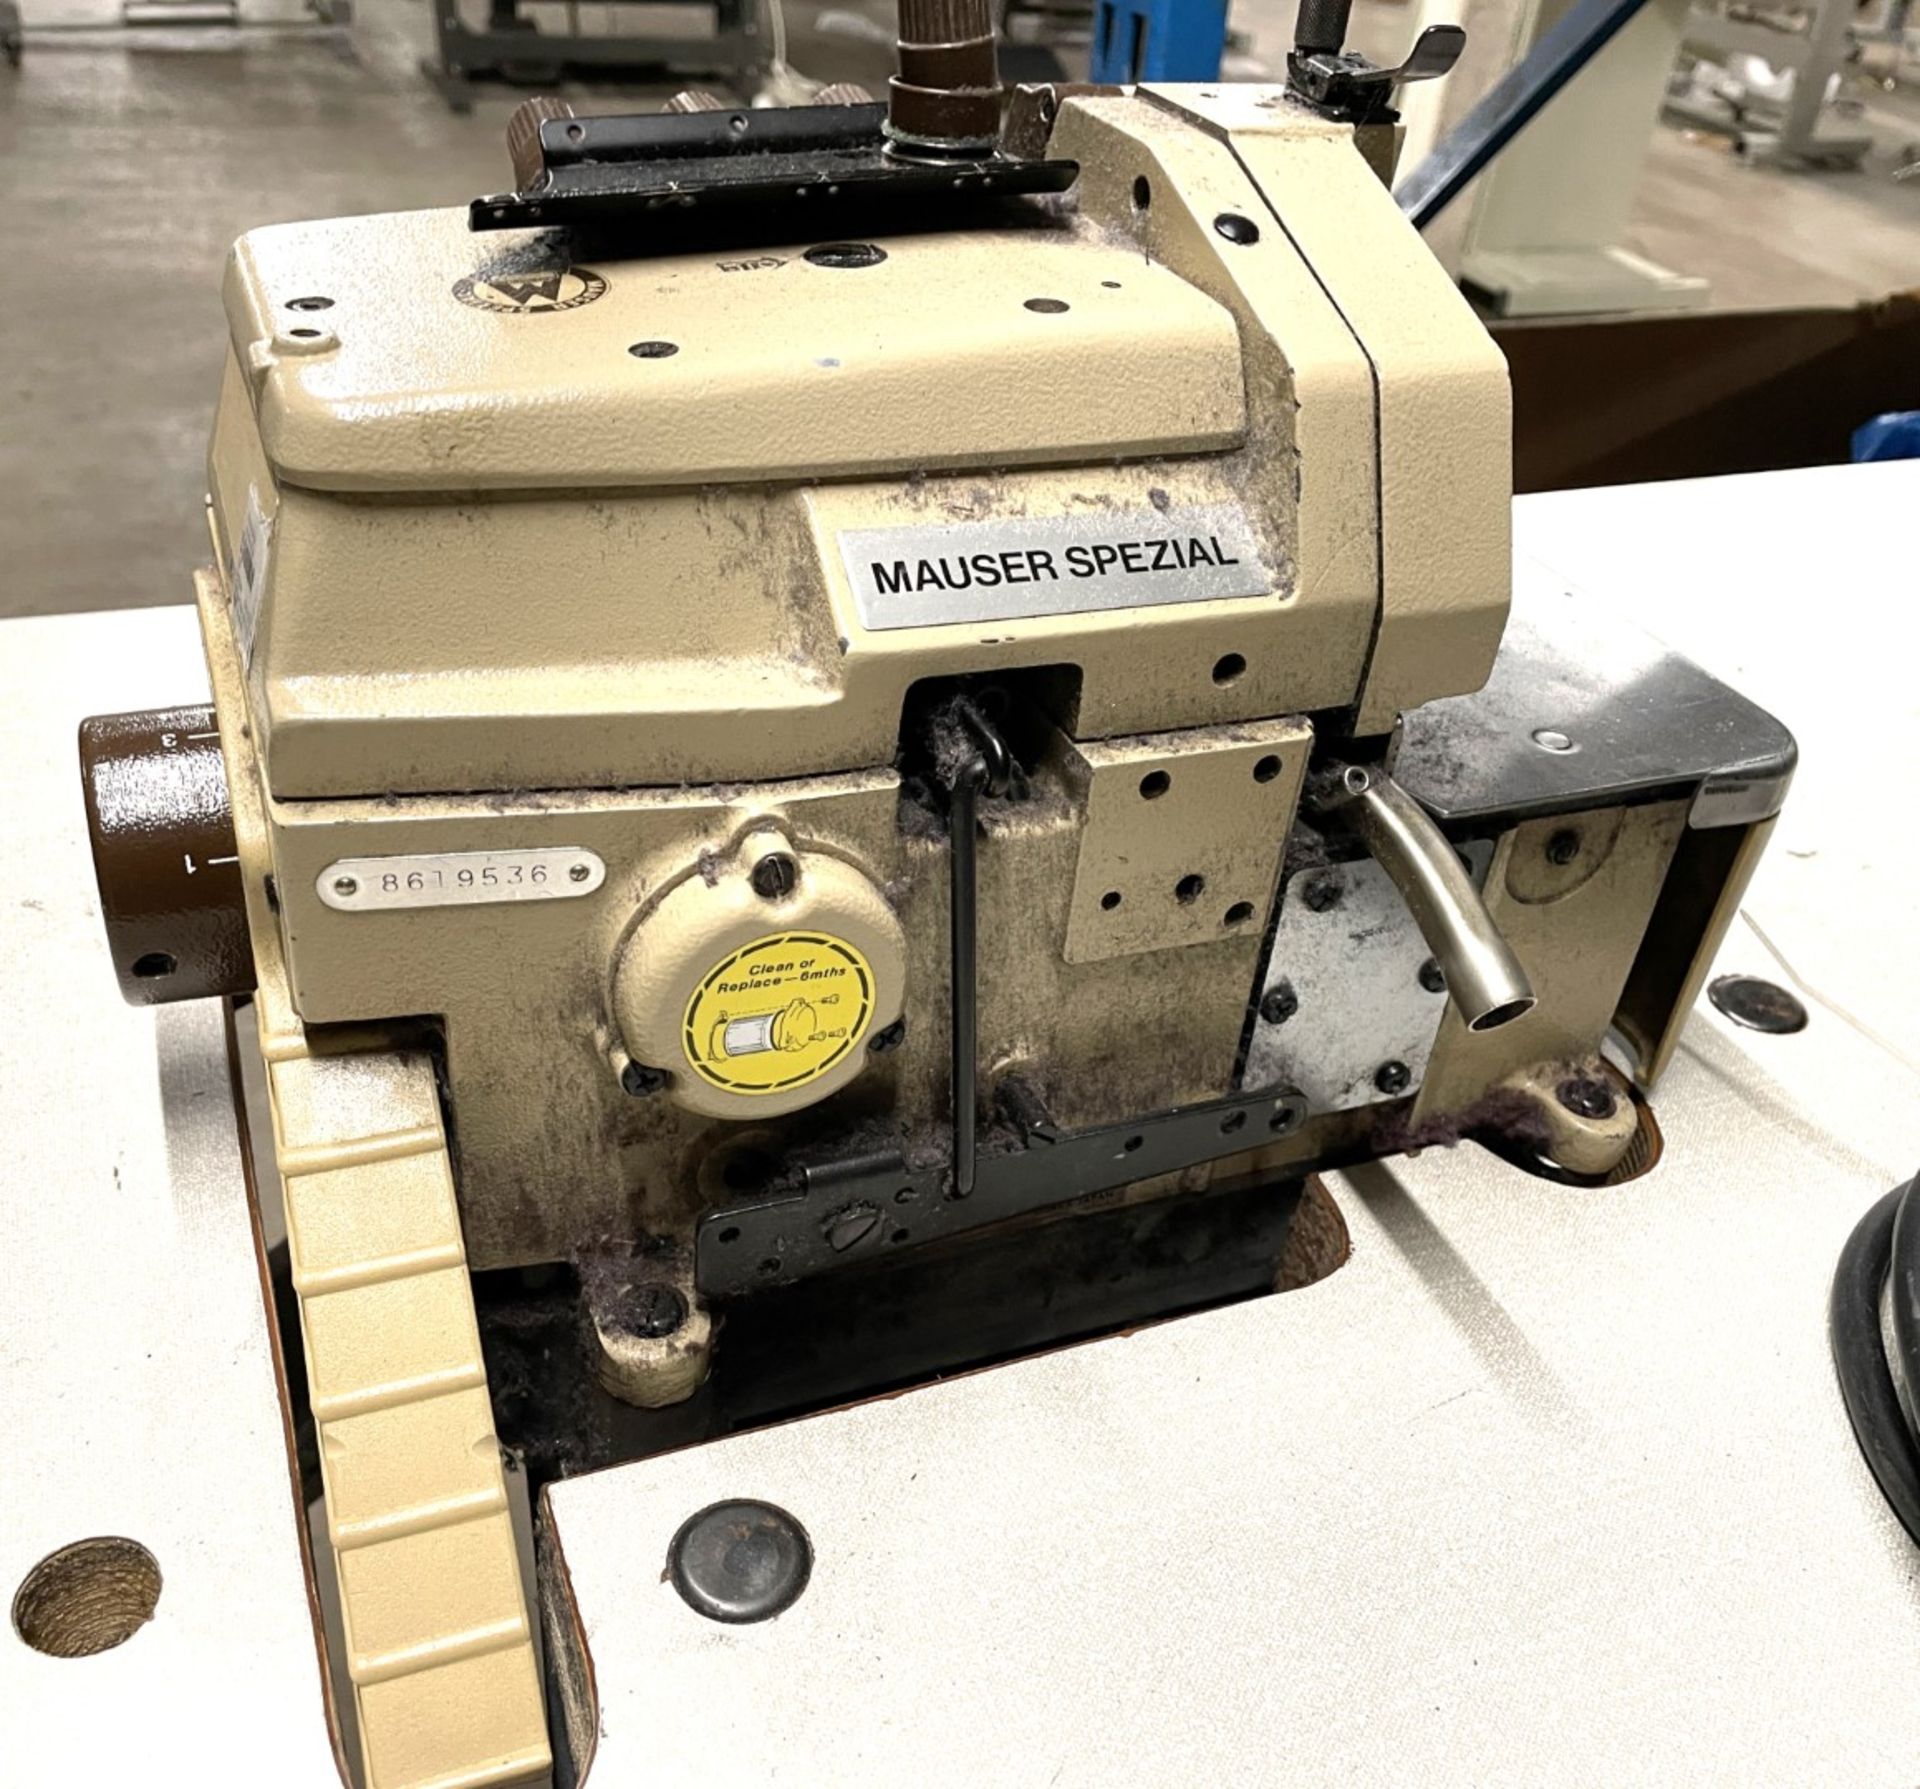 1 x Mauser Spezial 9652-184K Industrial Overlock Sewing Machine With Table - Image 9 of 11